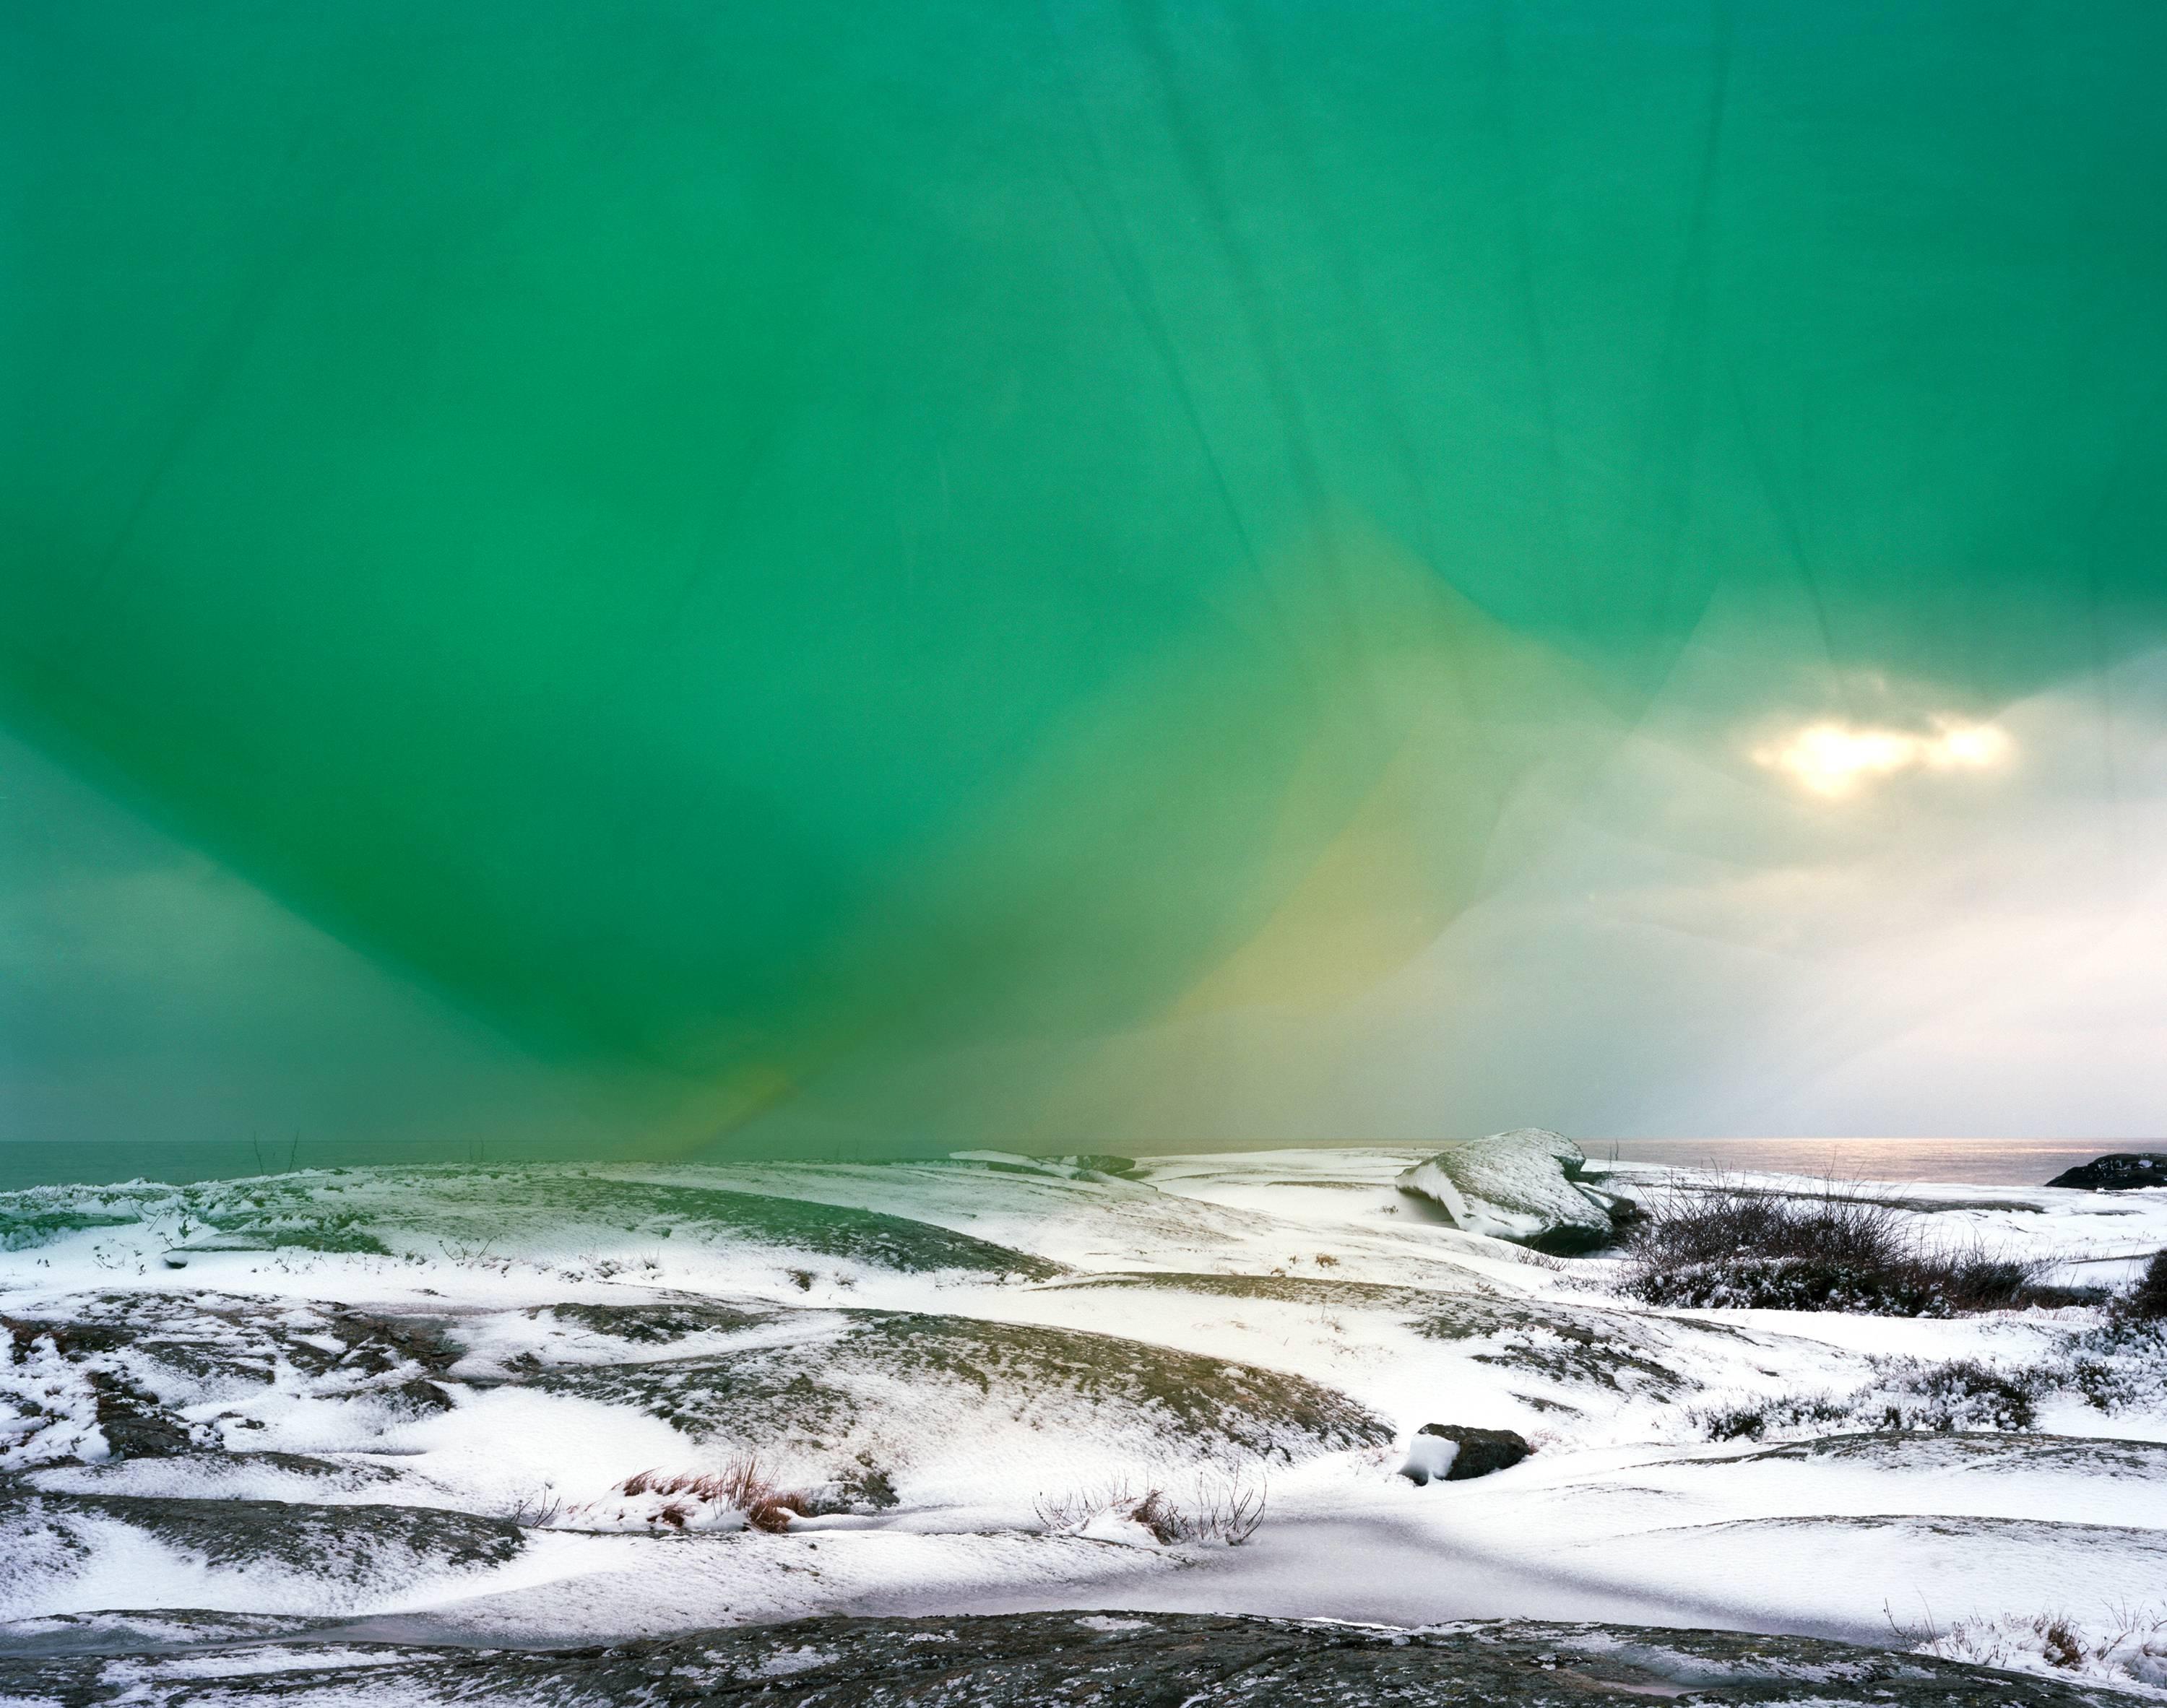 Ole Brodersen Landscape Photograph - String, Cloth, and Kite 05- abstract green photograph landscape